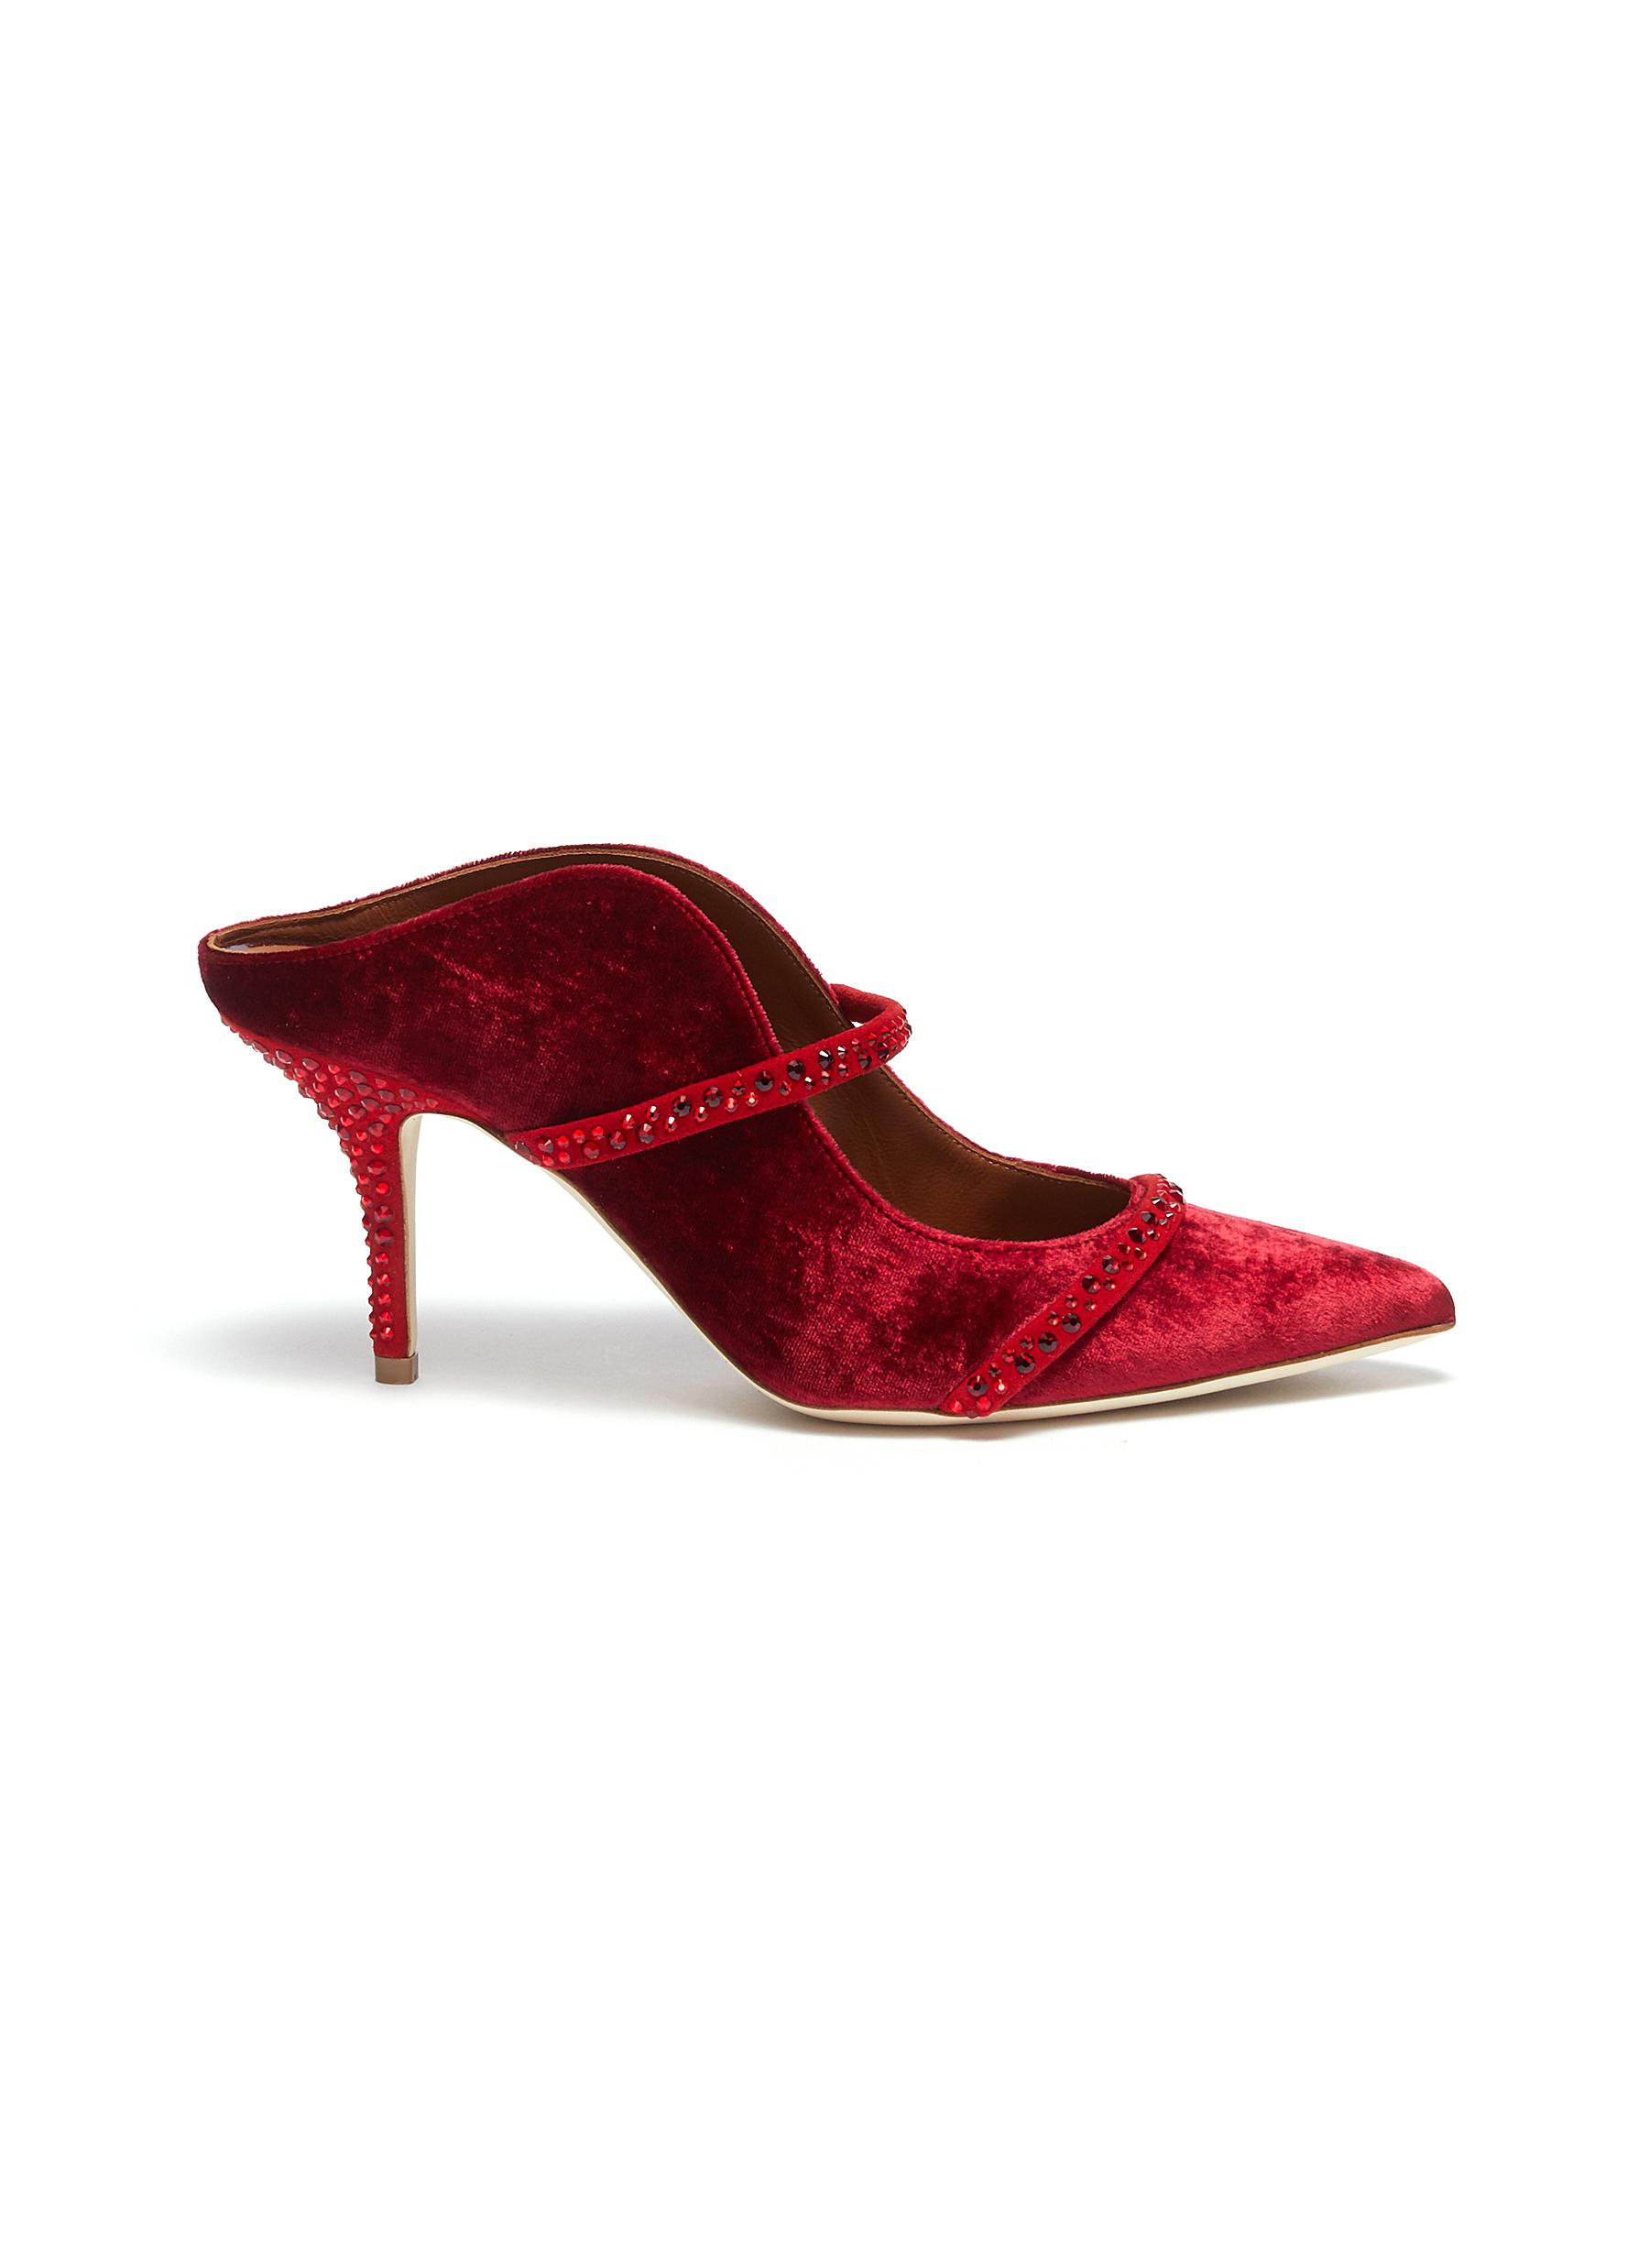 Maureen strass embellished strappy velvet mules by Malone Souliers